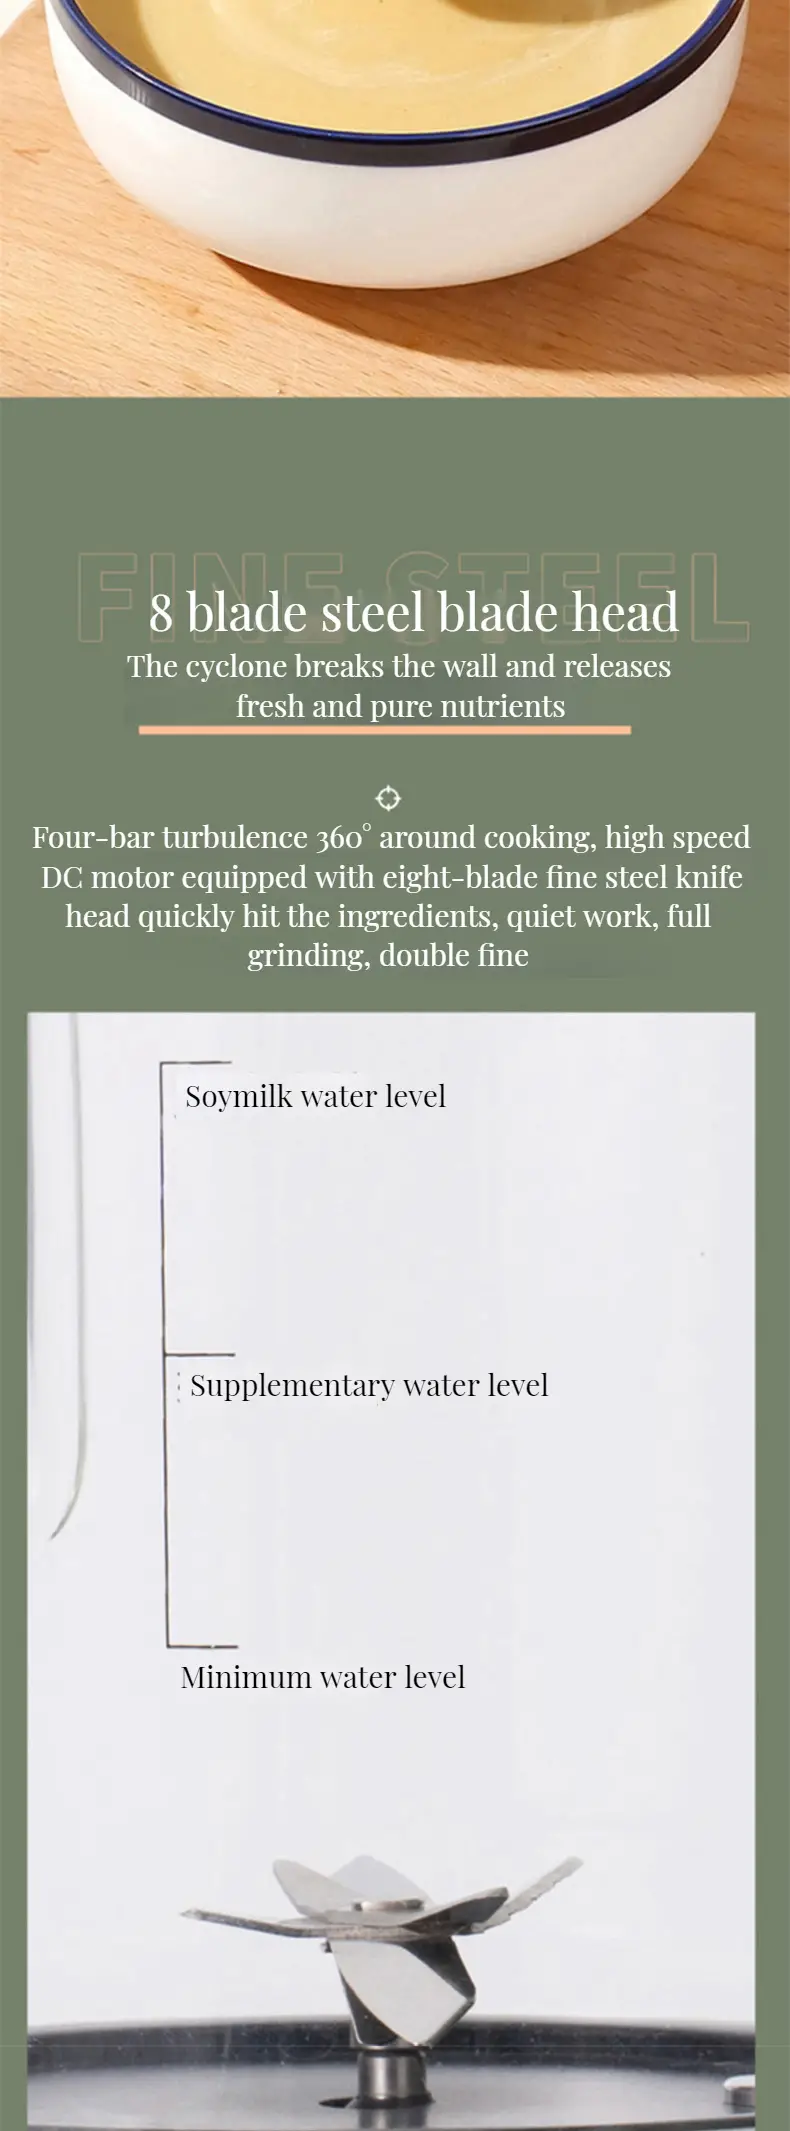 2 11 gal 800ml high boron high temperature resistant visual glass soymilk juicer original juicer household small mini automatic multi functional new wall breaker heating no cooking anti pasting bottom large capacity juicer can squeeze juice details 11